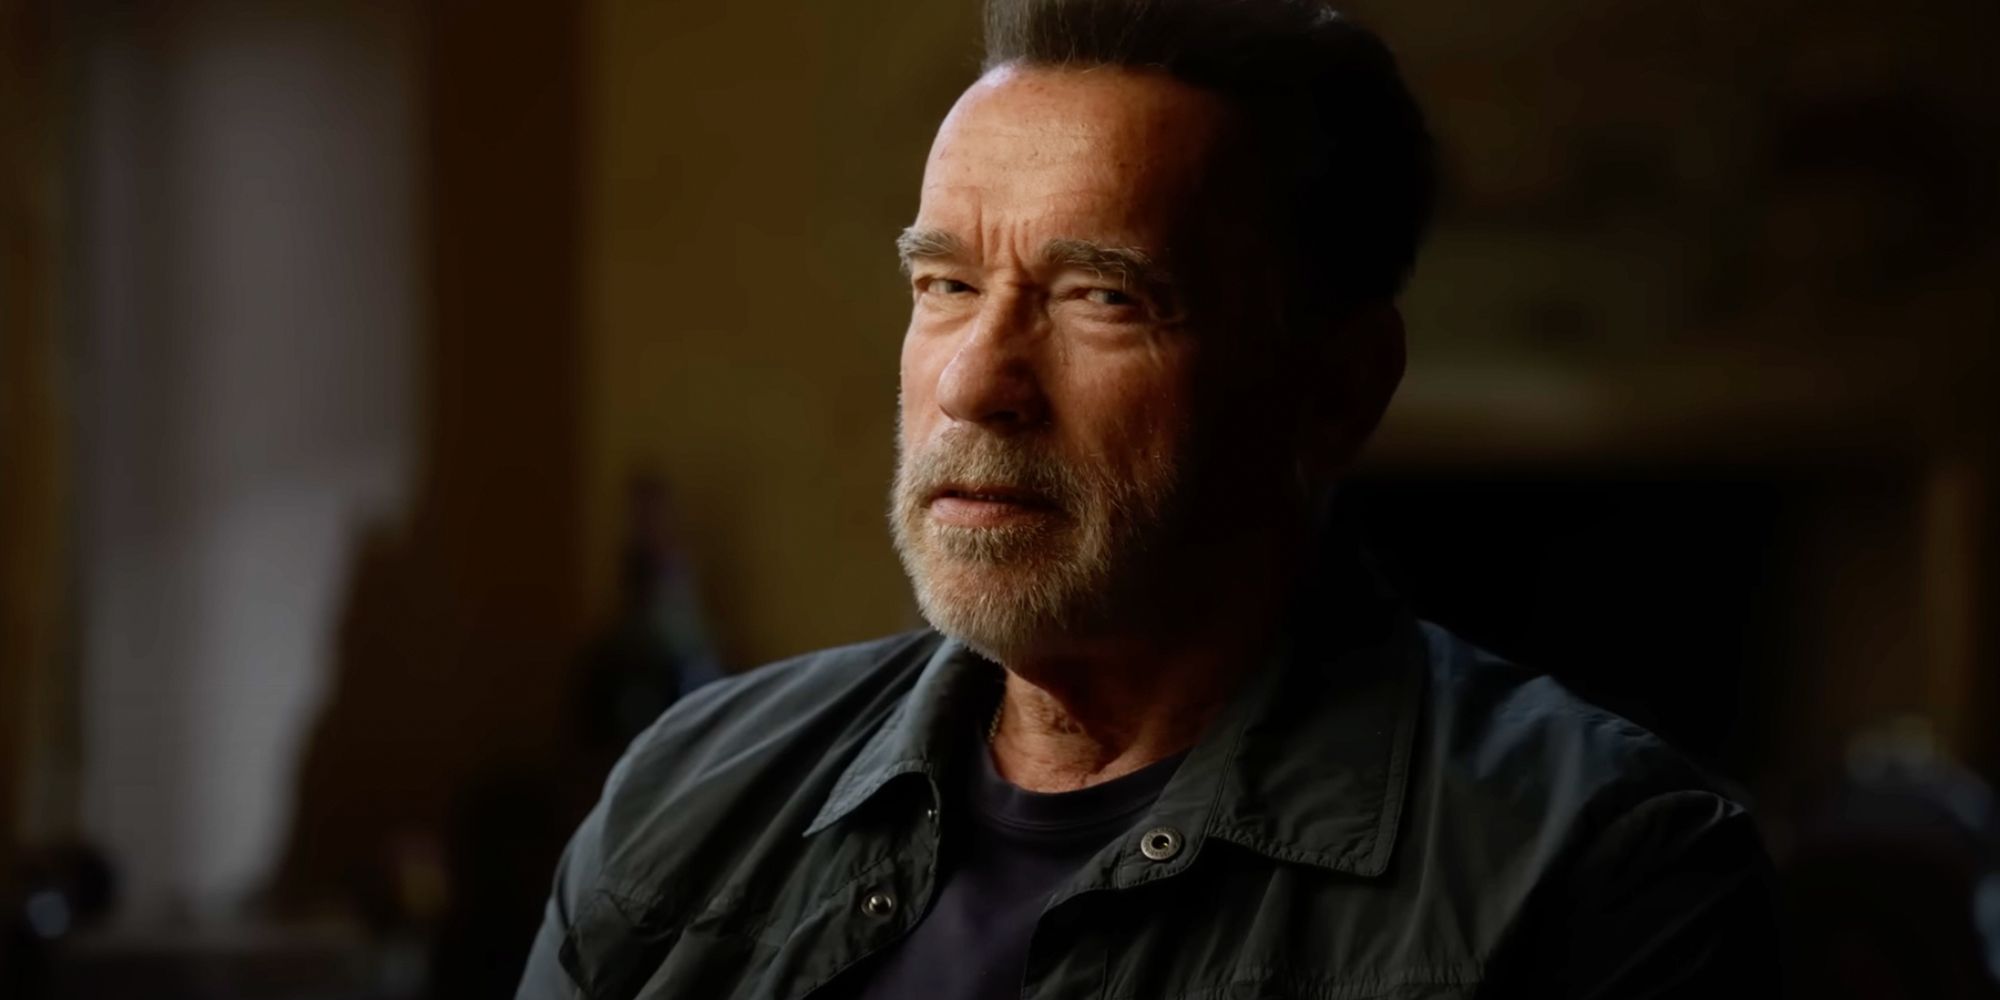 He Was the Dragon I Had To Slay”: Arnold Schwarzenegger Disclosed